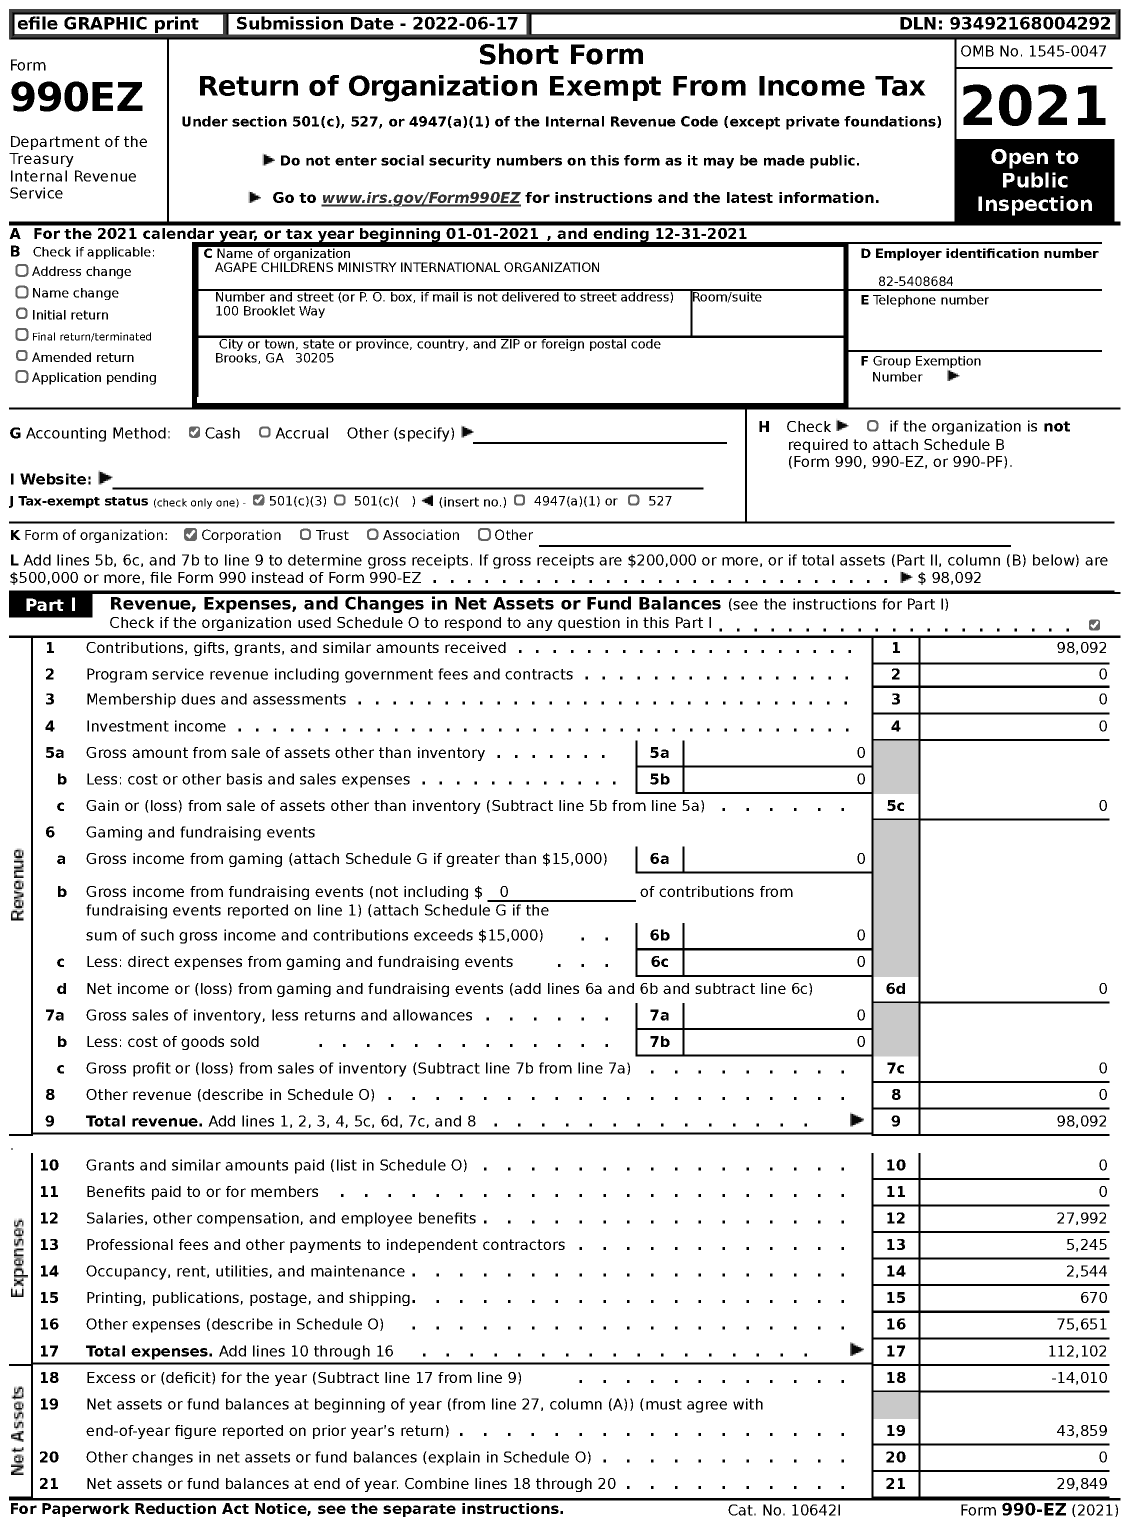 Image of first page of 2021 Form 990EZ for Agape Childrens Ministry International Organization